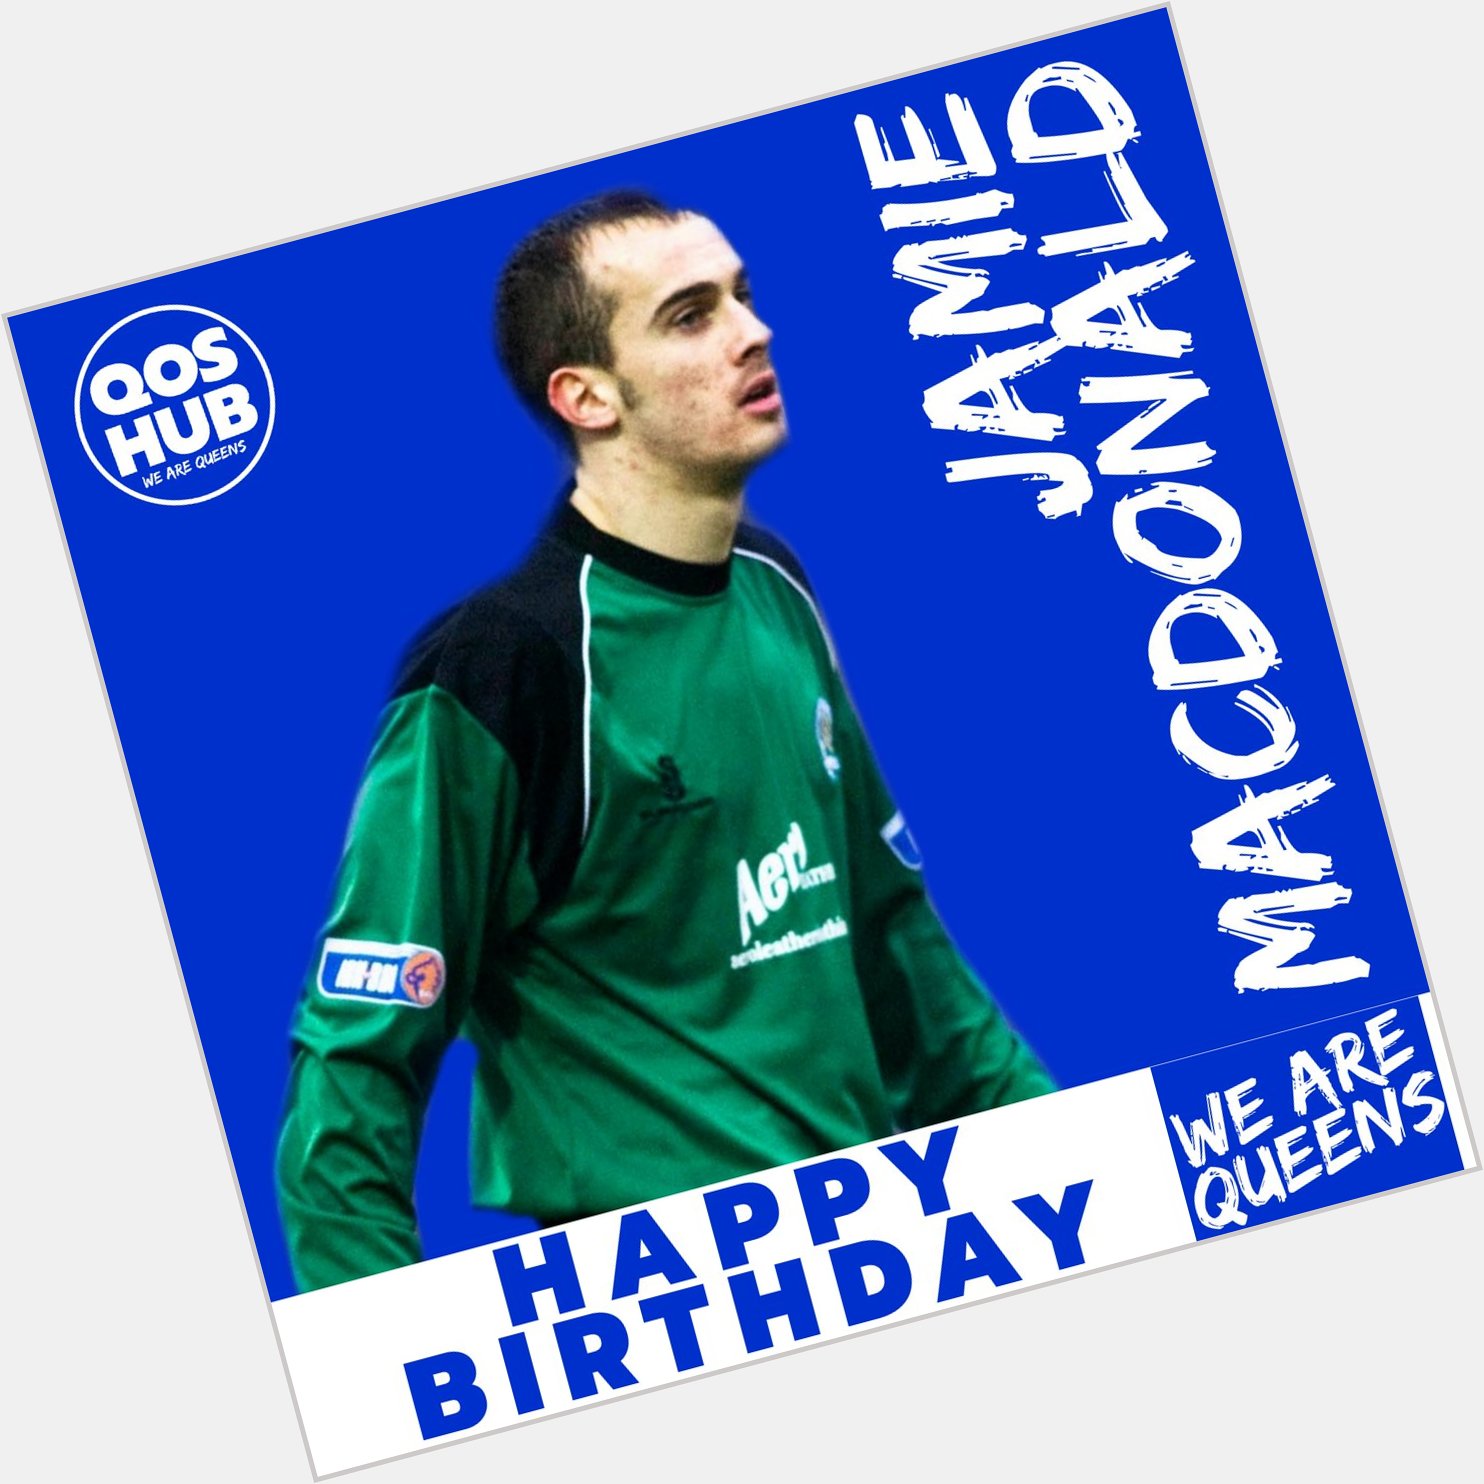 |Birthday|

Happy 34th birthday to one of our Hampden Heroes, Jamie MacDonald! 